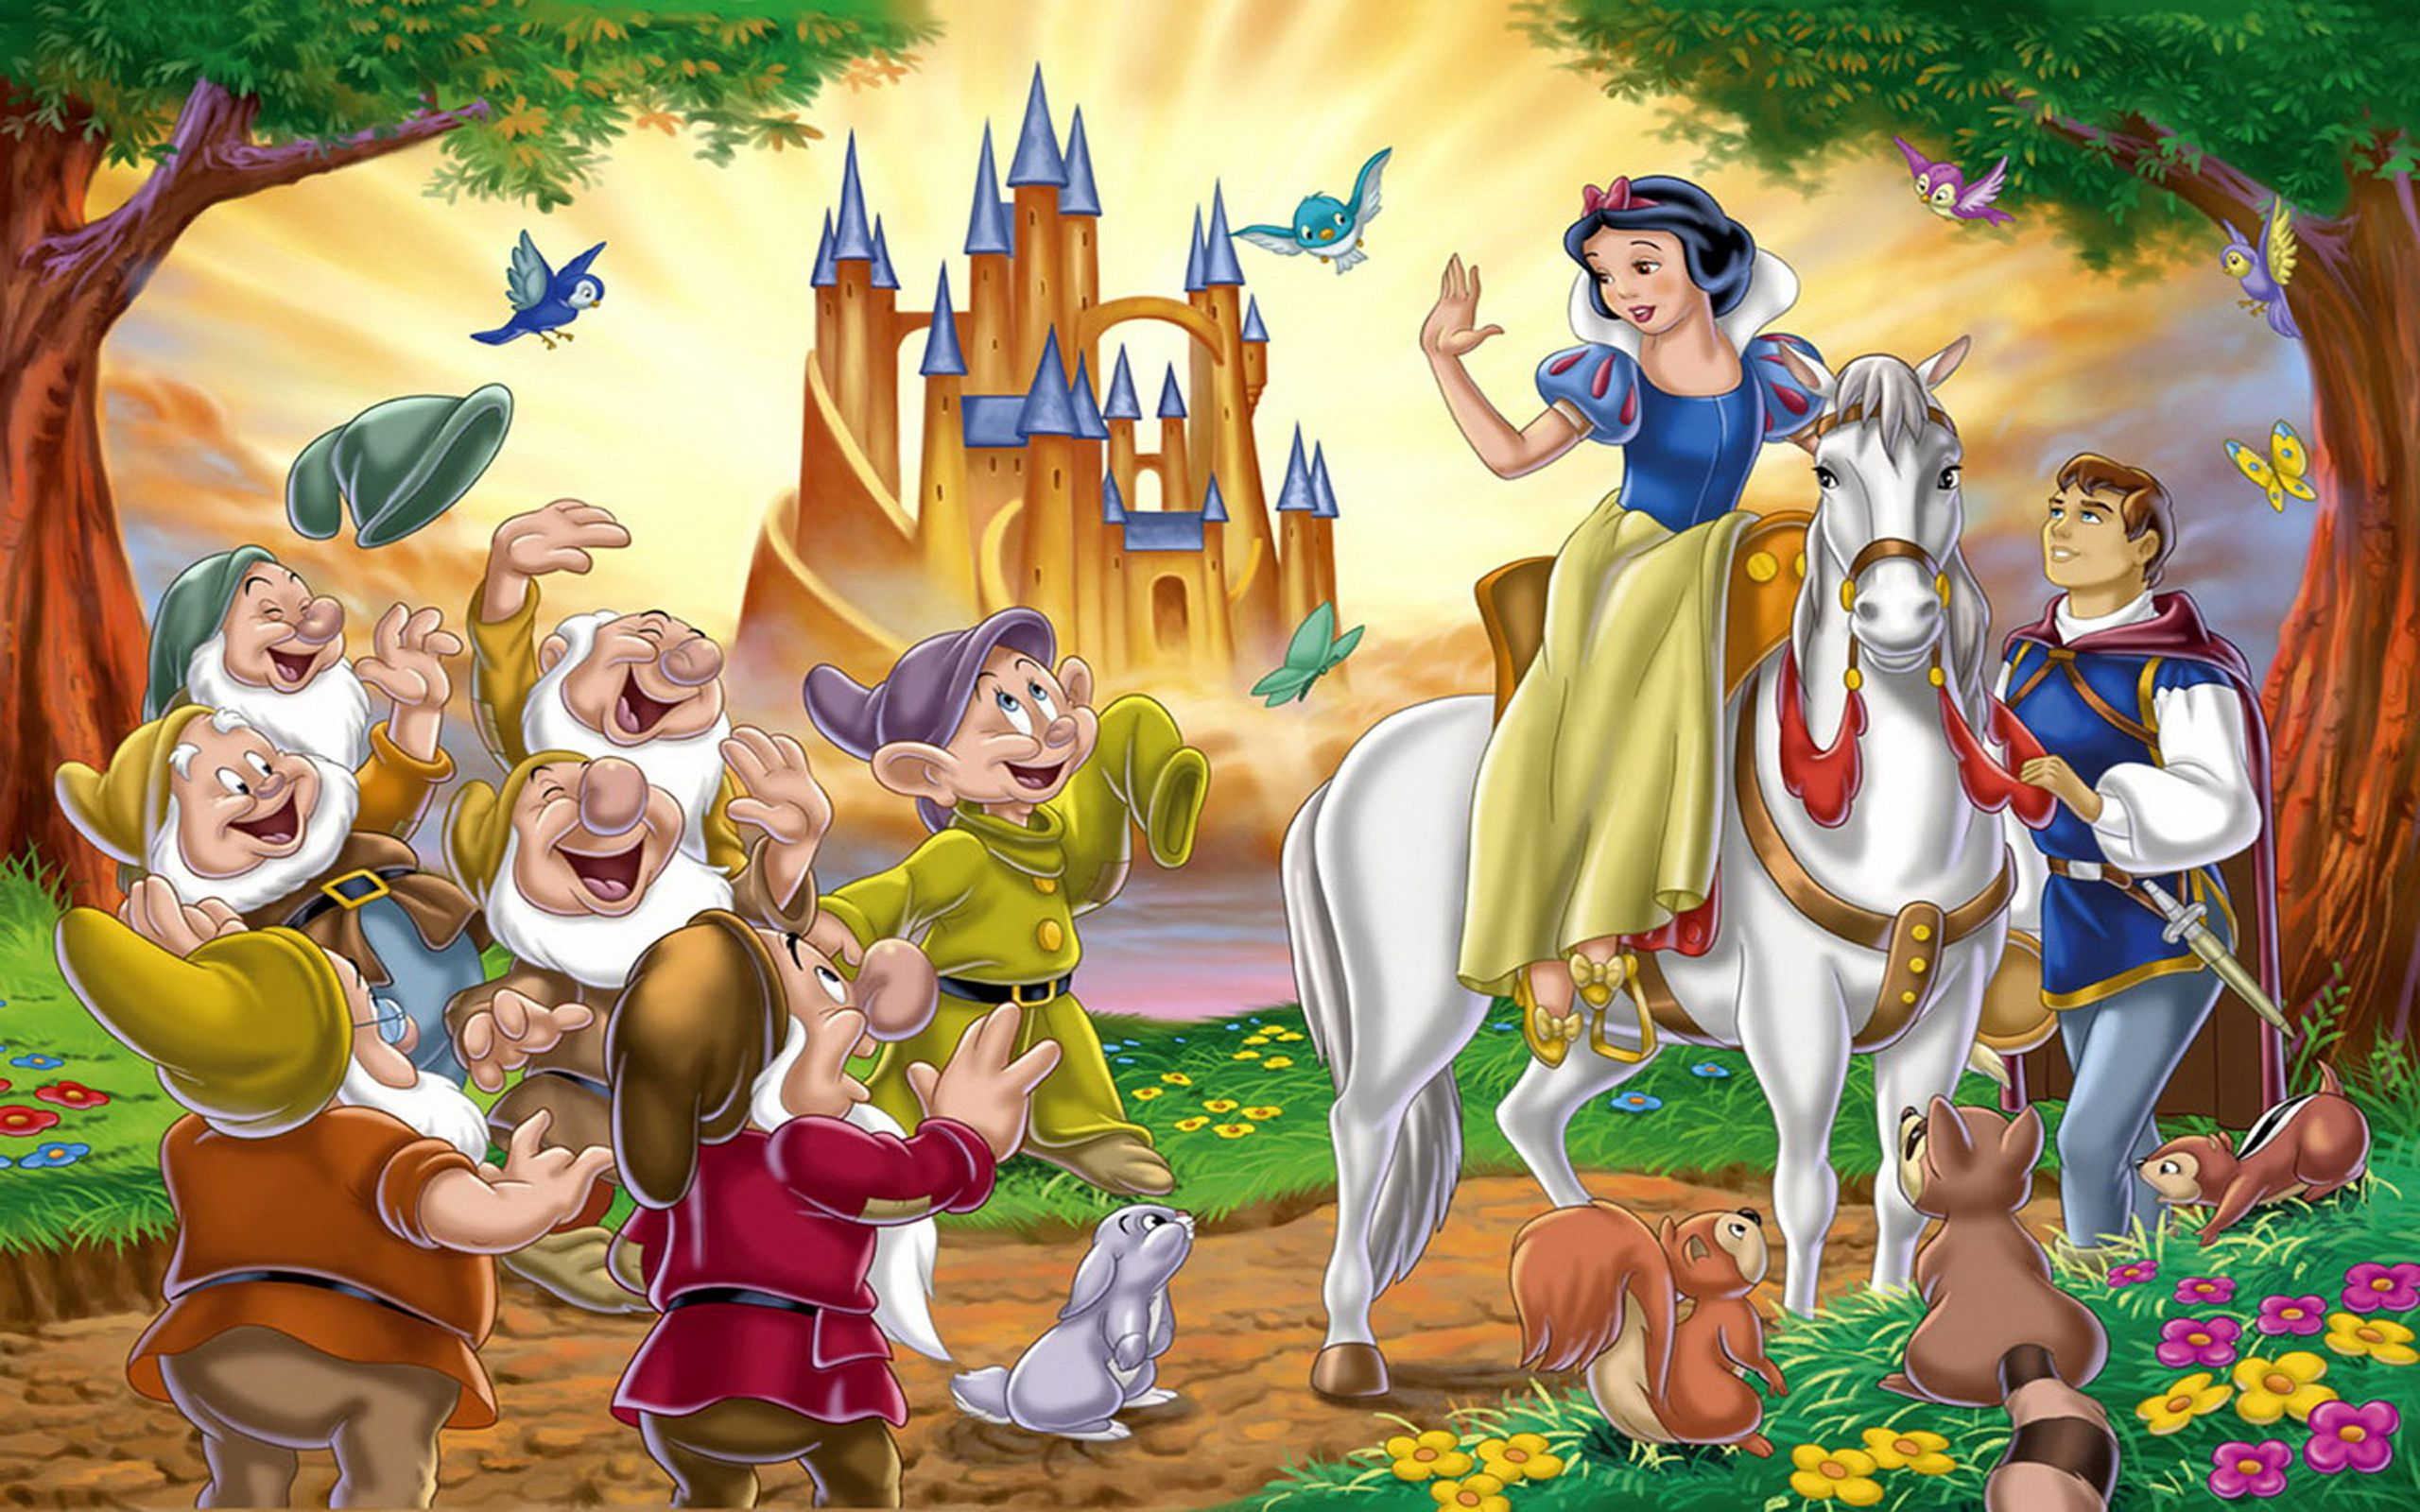 2560x1600 Snow White and the Seven Dwarfs Wallpapers Top Free Snow White and the Seven Dwarfs Backgrounds